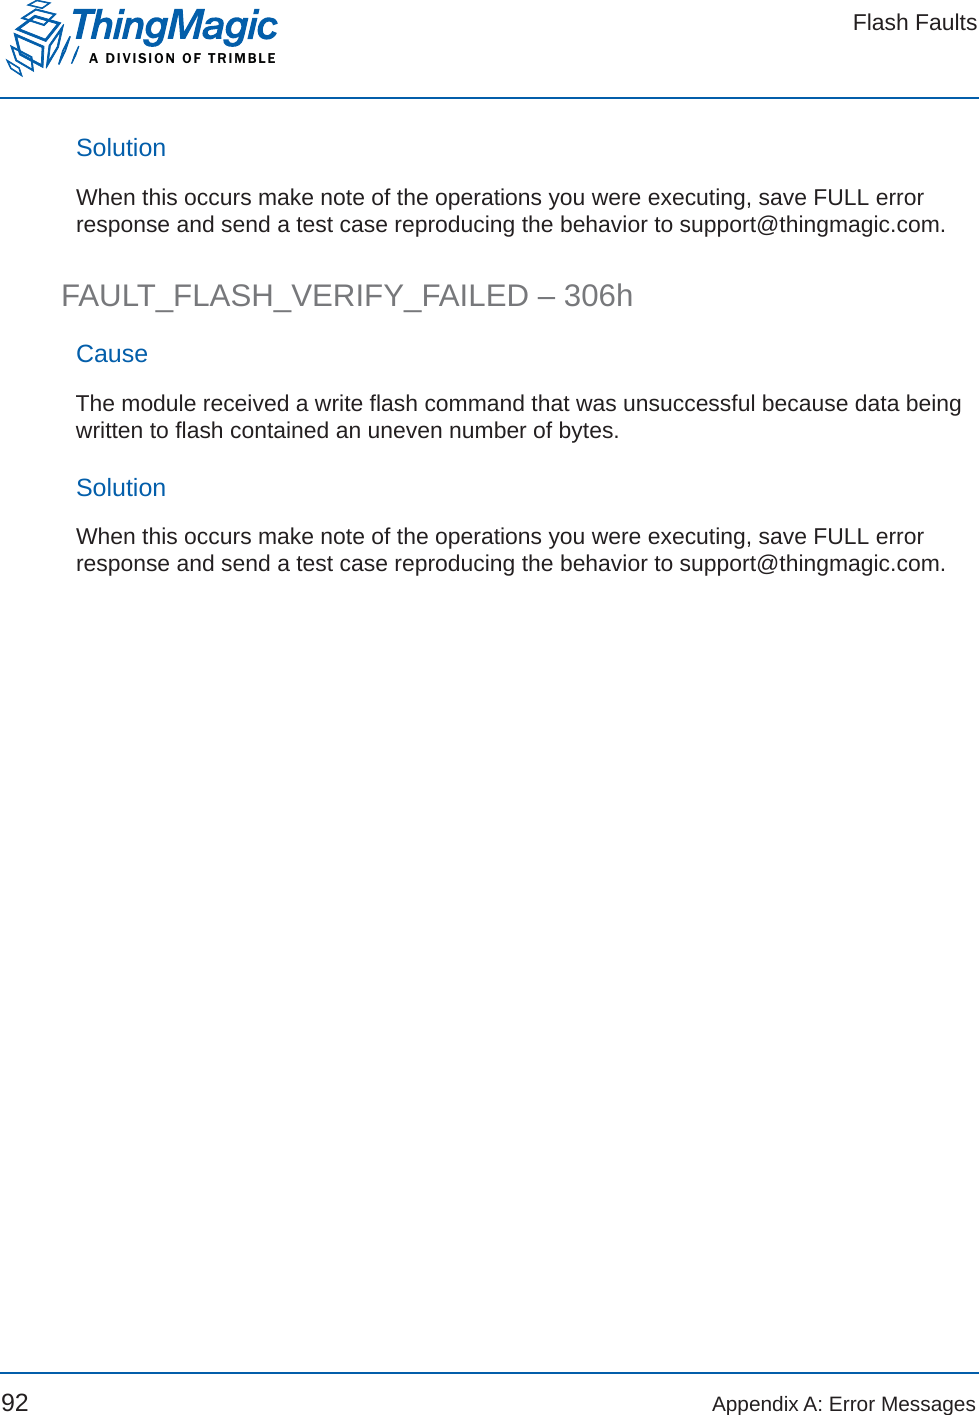 Flash FaultsA DIVISION OF TRIMBLE92 Appendix A: Error MessagesSolutionWhen this occurs make note of the operations you were executing, save FULL error response and send a test case reproducing the behavior to support@thingmagic.com.FAULT_FLASH_VERIFY_FAILED – 306hCauseThe module received a write flash command that was unsuccessful because data being written to flash contained an uneven number of bytes.SolutionWhen this occurs make note of the operations you were executing, save FULL error response and send a test case reproducing the behavior to support@thingmagic.com.